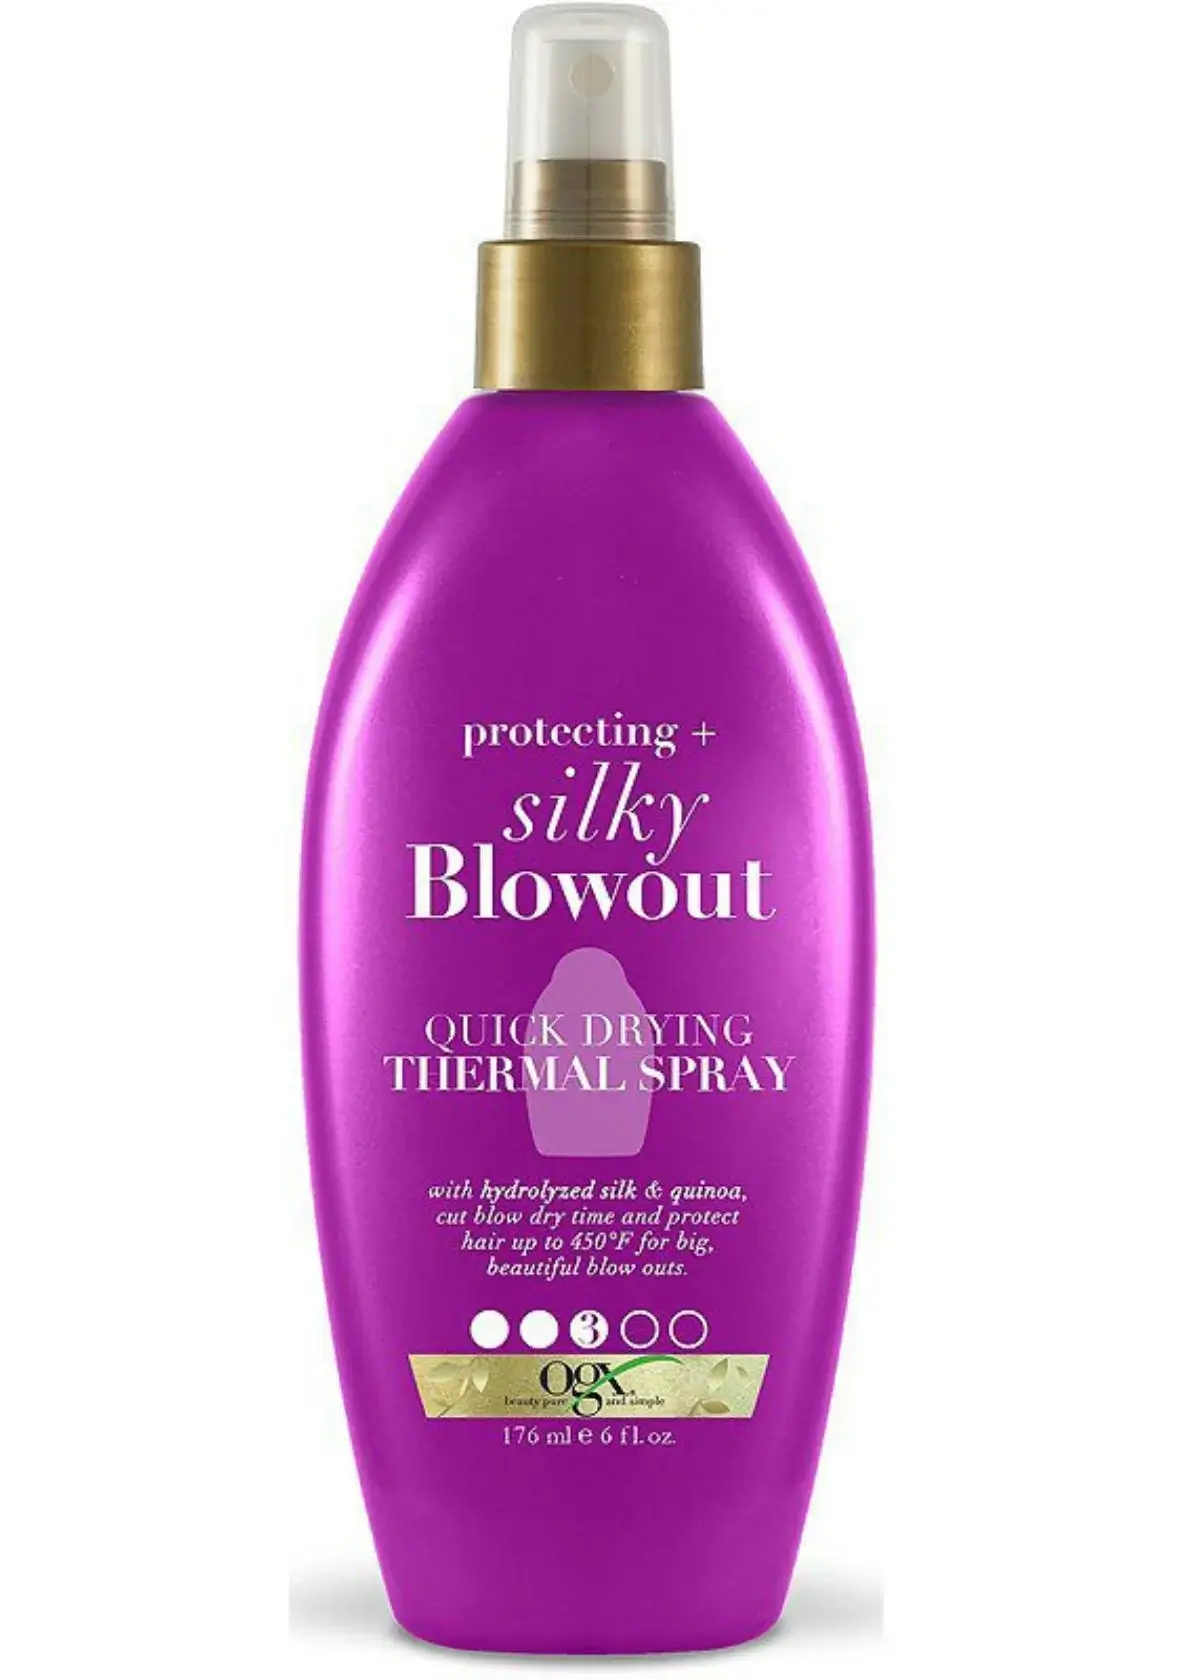 What is the purpose of a heat protectant for natural hair?